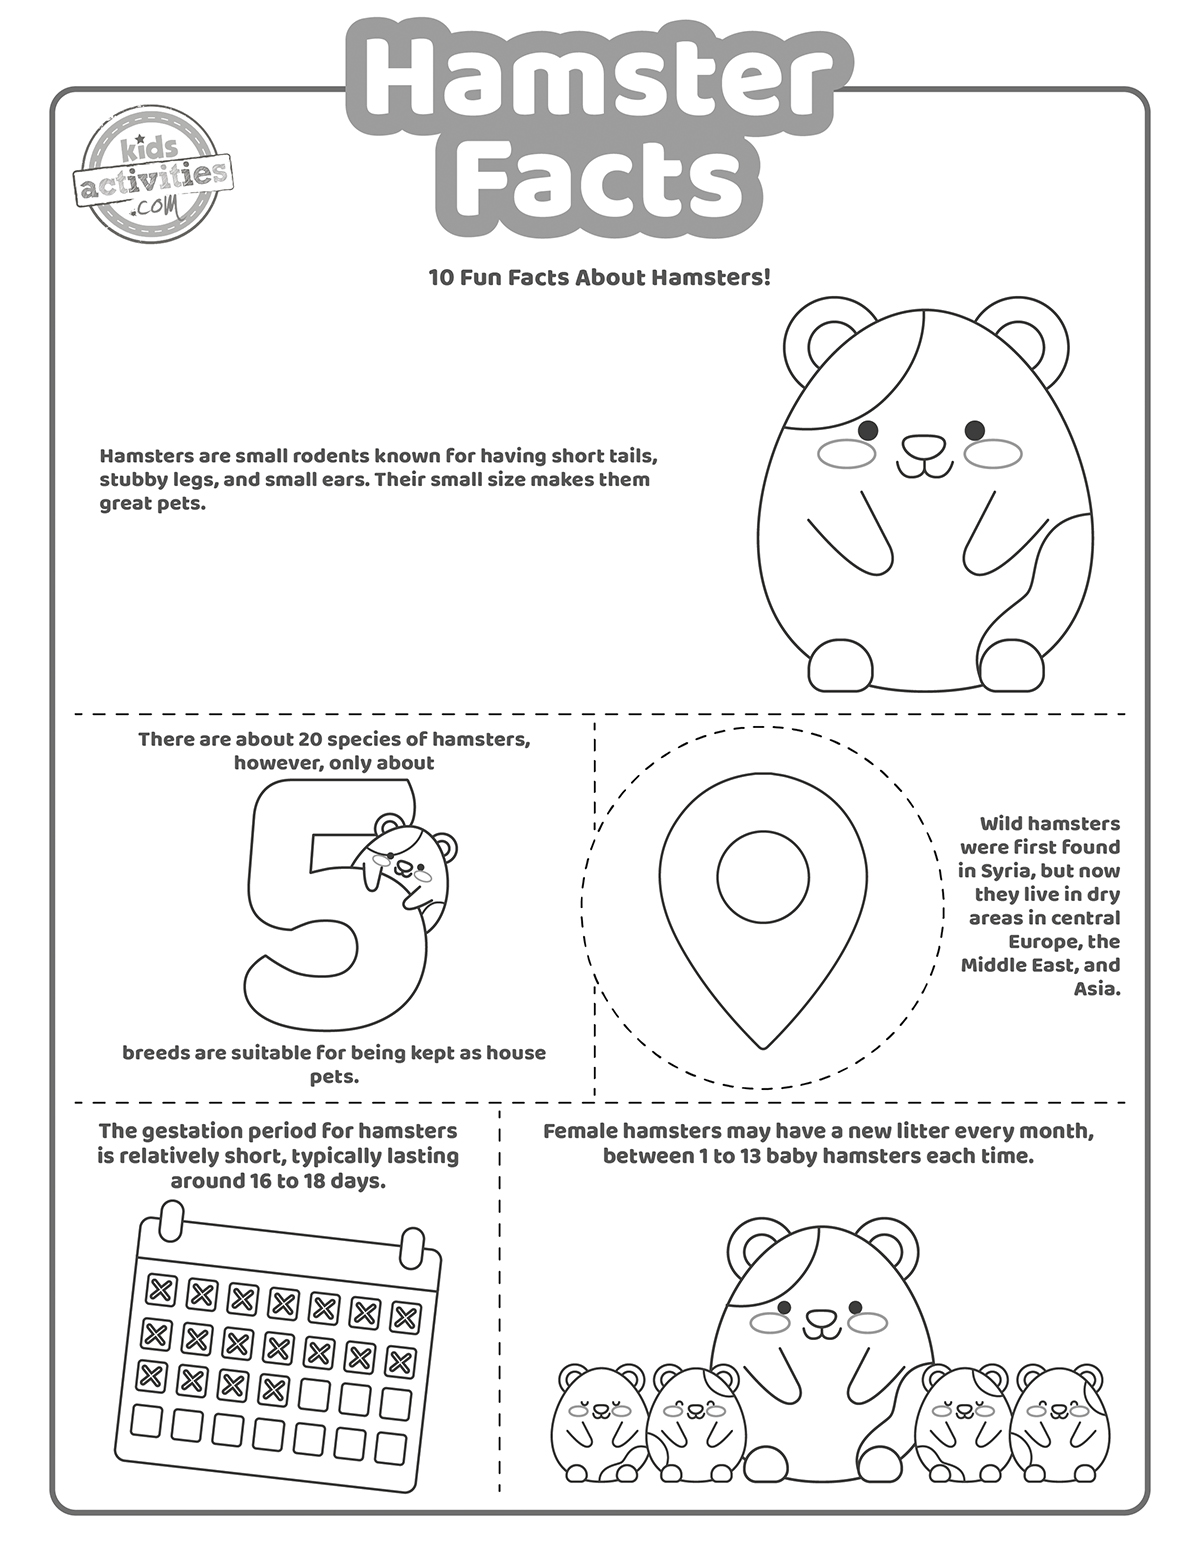 hamster facts coloring pages - a sheet with different facts about hamsters and drawings representing the facts, coloring page for kids shown in black and white printed pdf version from Kids activities blog. 